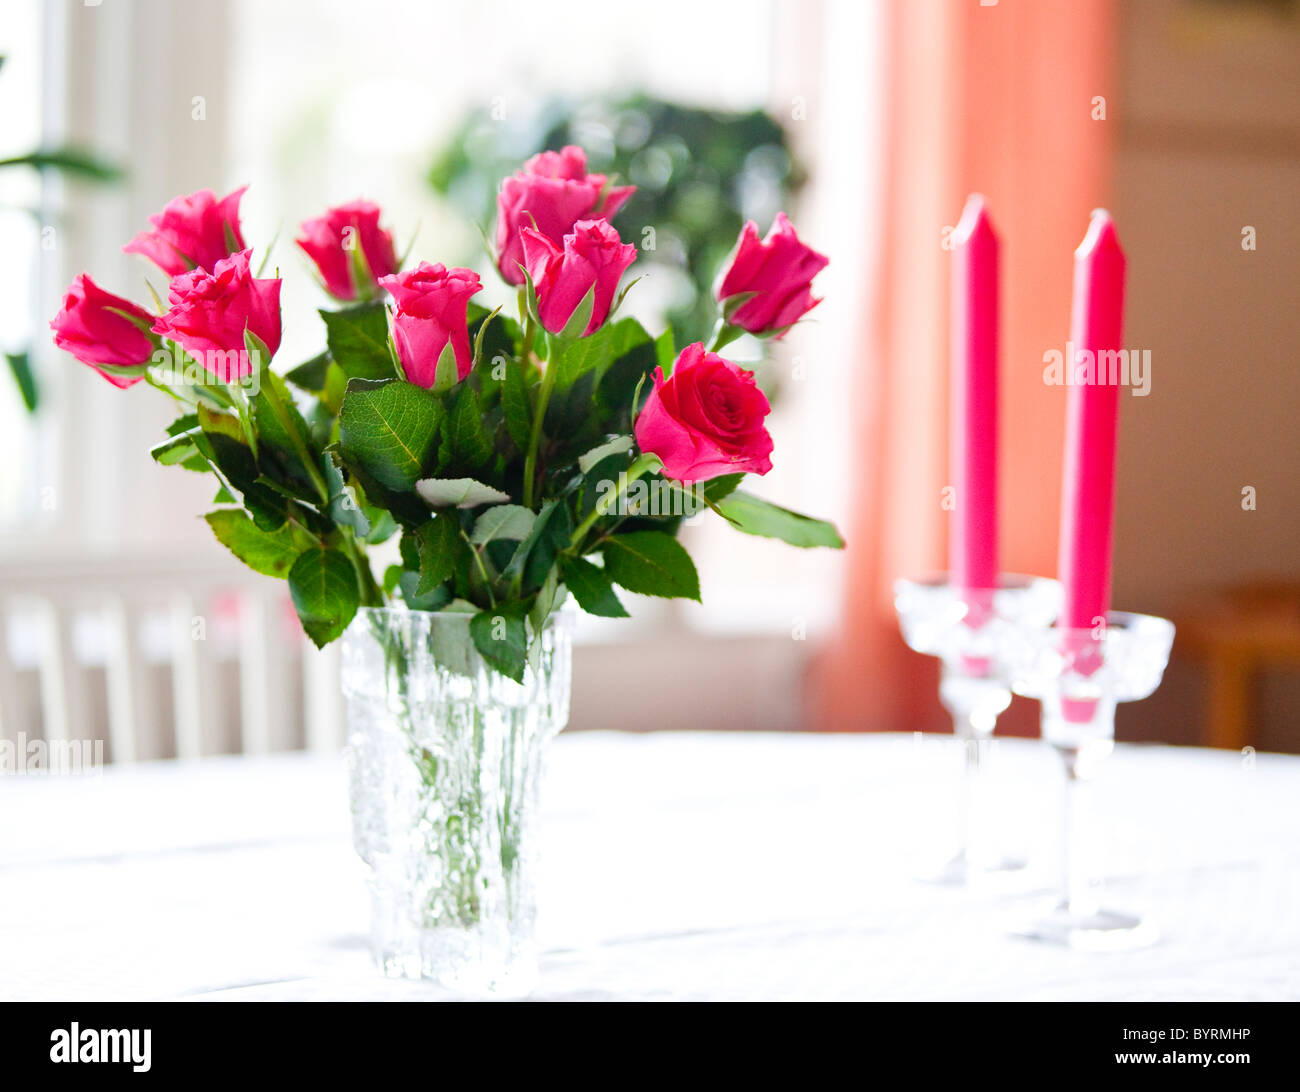 Bunch of flowers in a vase.Sweden Stock Photo